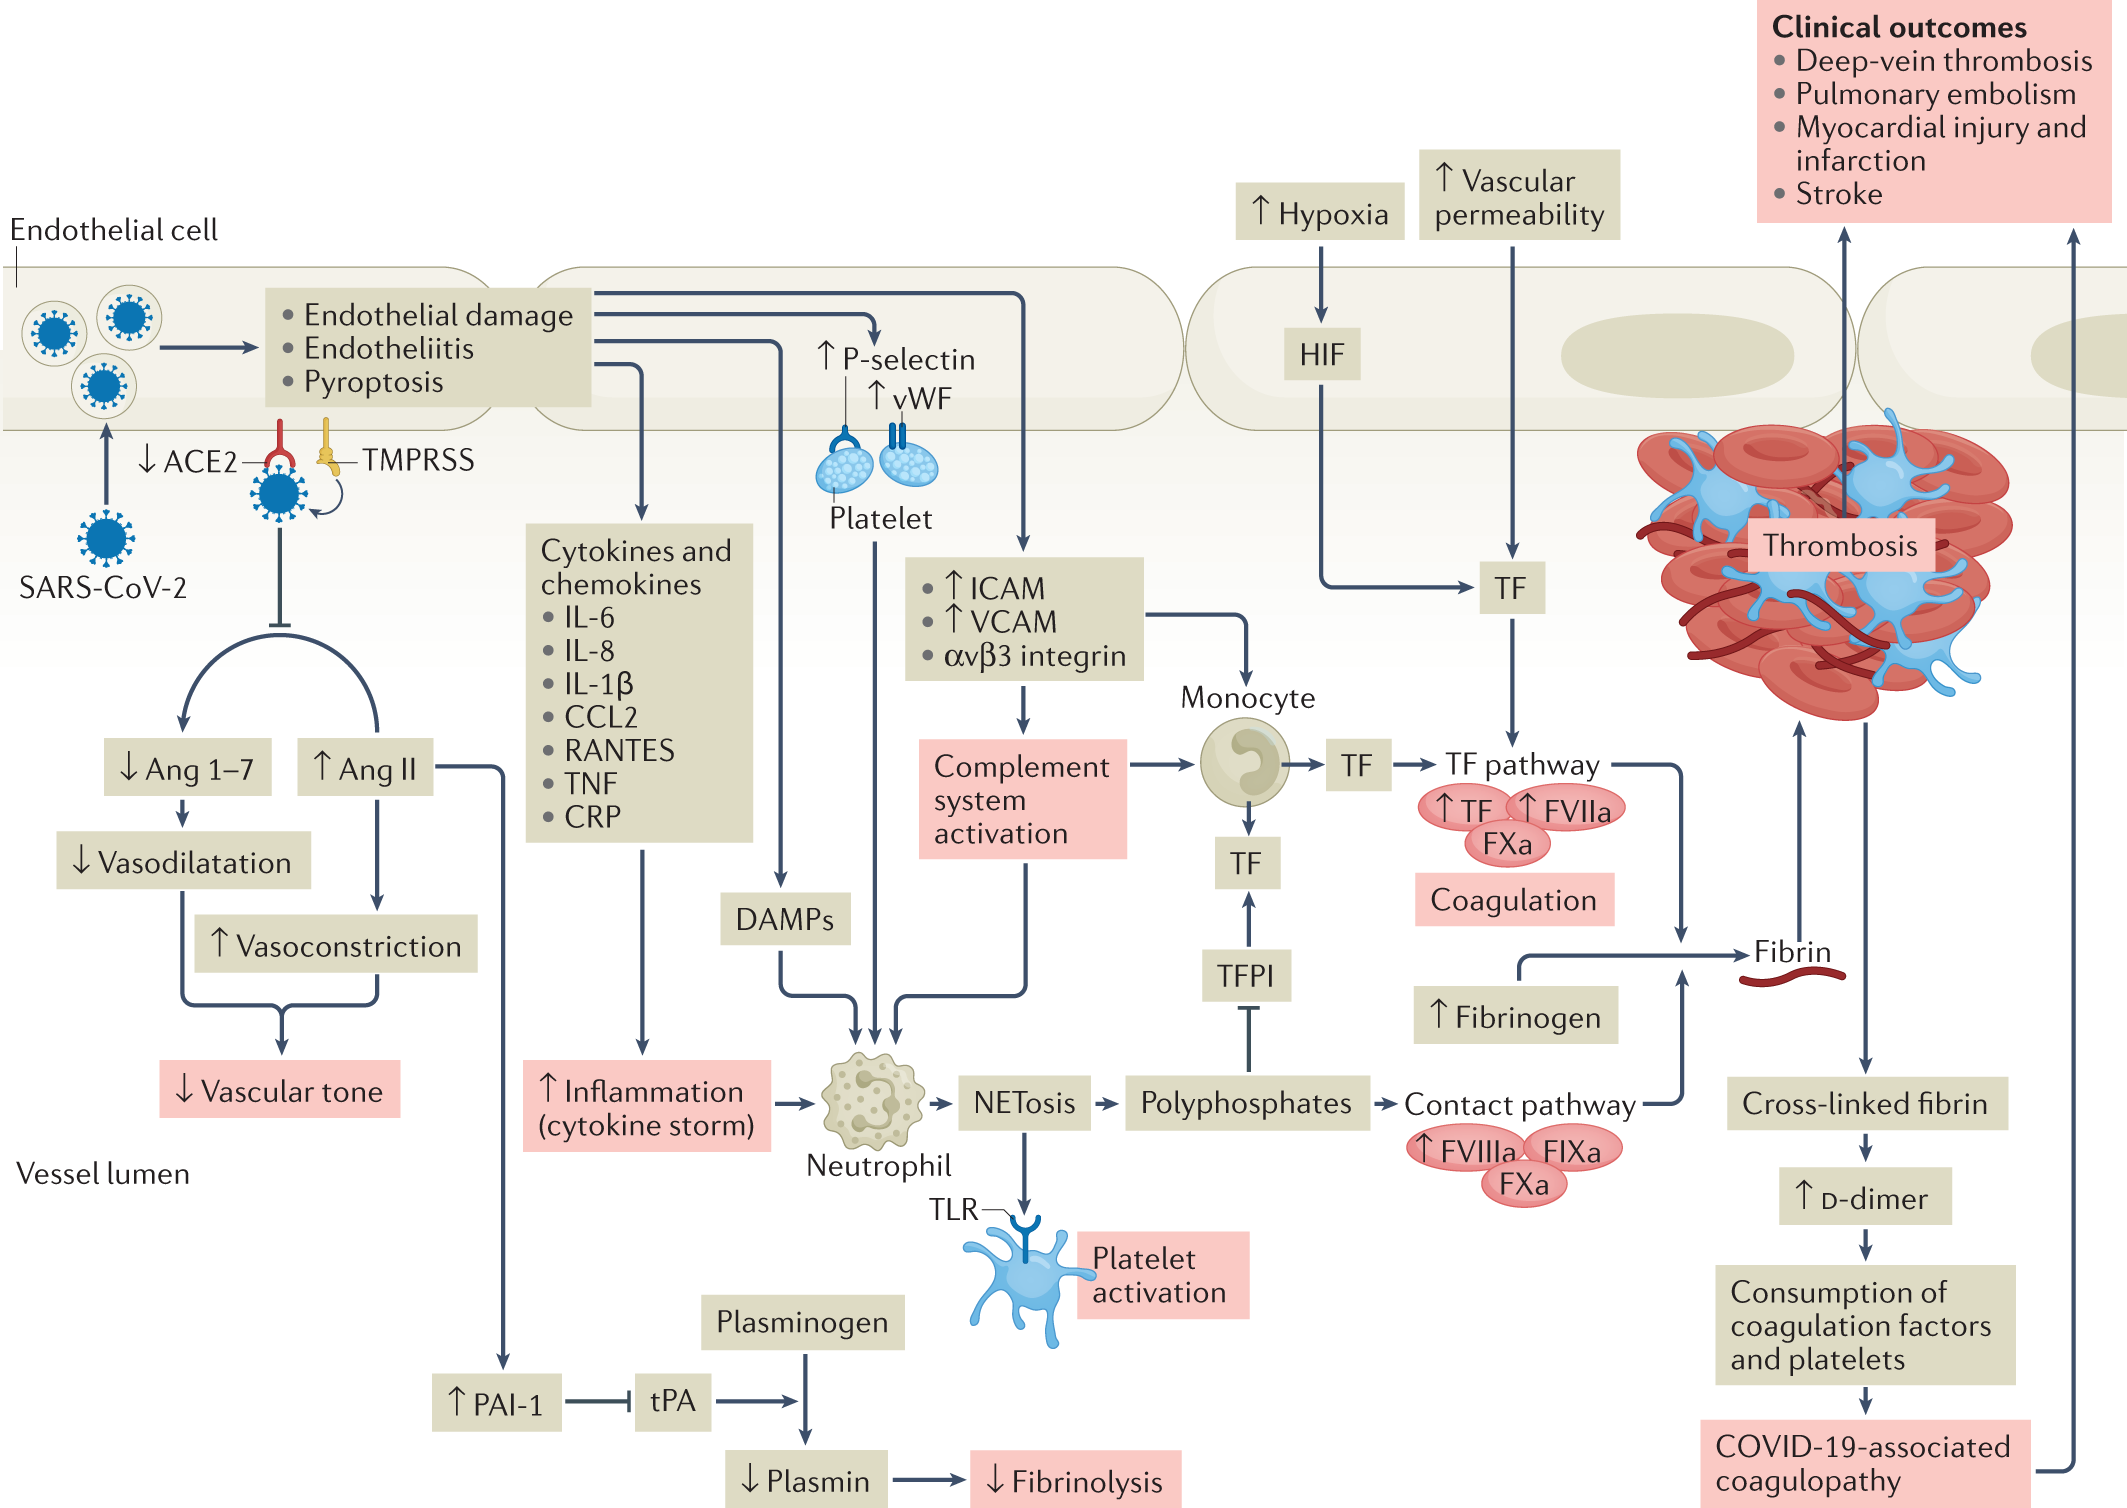 Current and novel biomarkers of thrombotic risk in COVID-19: a Consensus  Statement from the International COVID-19 Thrombosis Biomarkers Colloquium  | Nature Reviews Cardiology